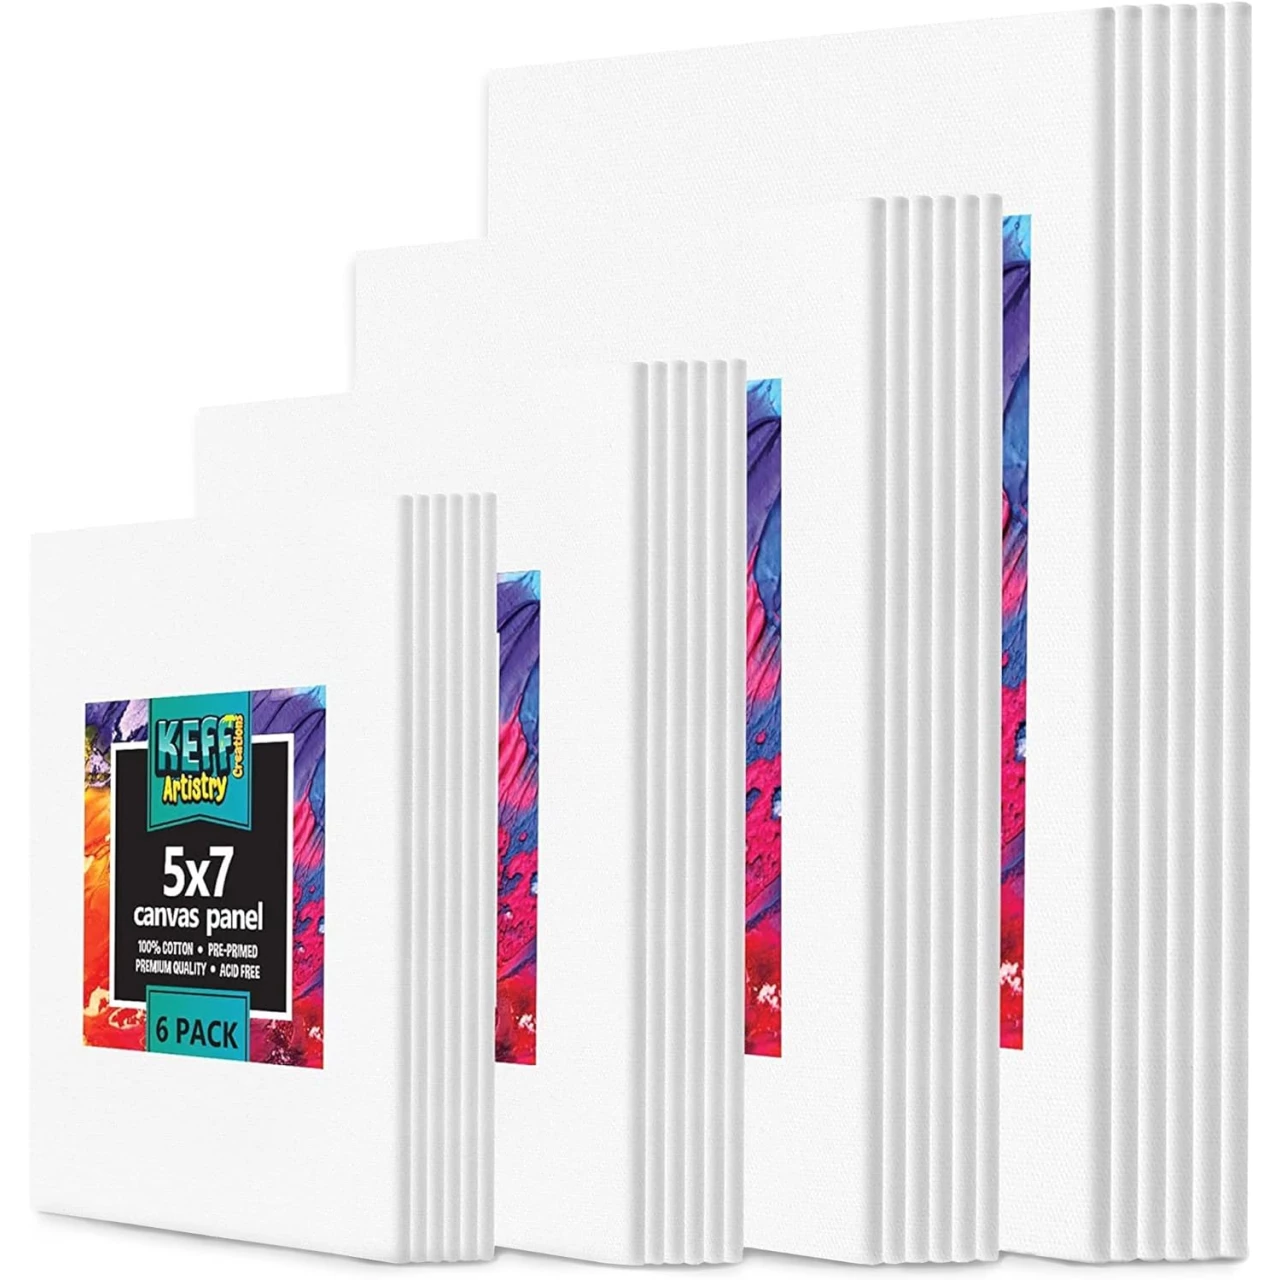 KEFF Canvases for Painting - 24 Pack Art Paint Canvas Panels Set Boards - 5x7, 8x10, 9x12, 11x14 Inches 100% Cotton Primed Painting Supplies for Acrylic, Oil, Tempera &amp; Watercolor Paint